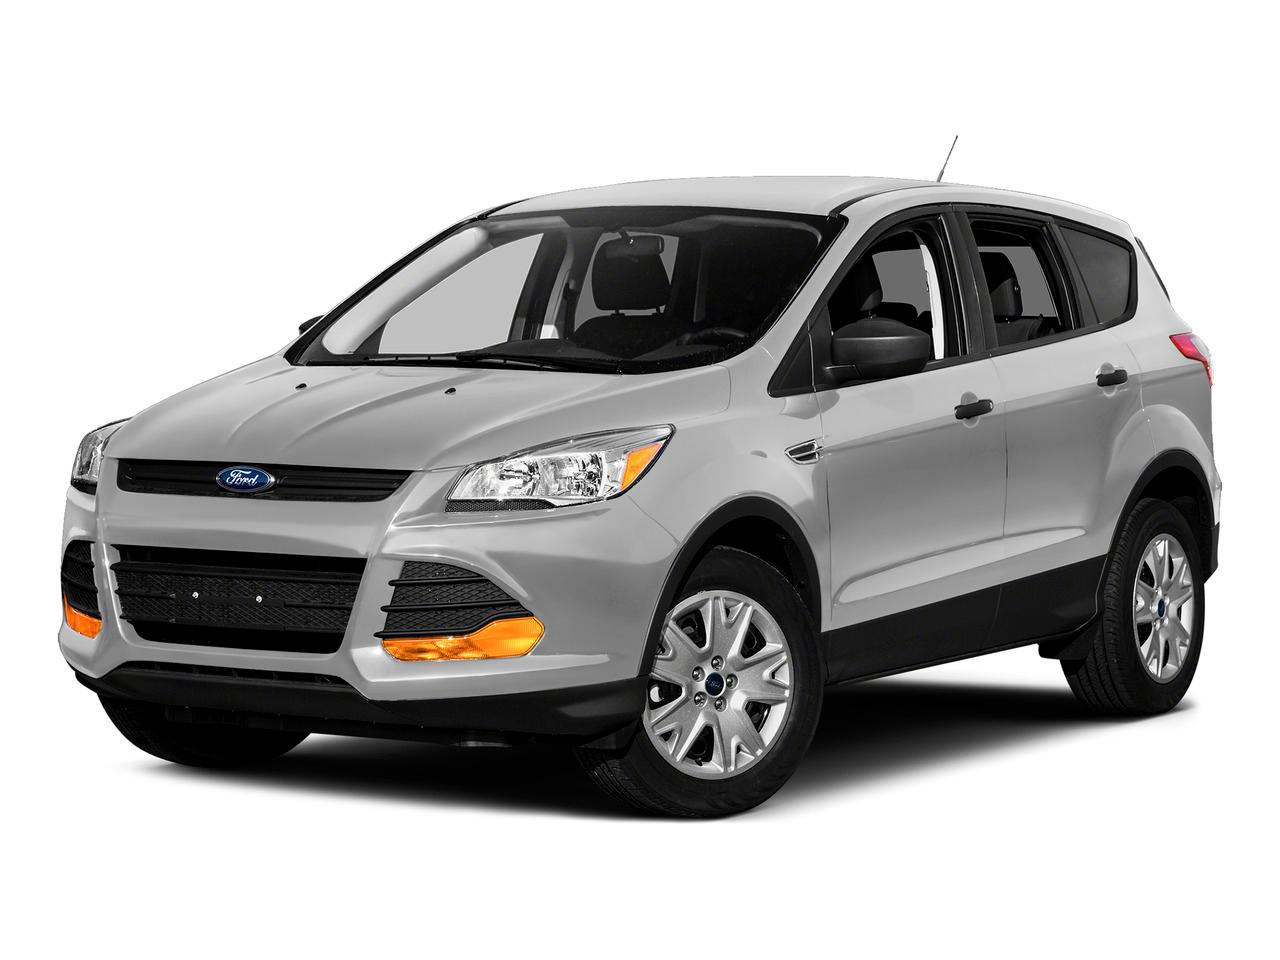 2015 Ford Escape Vehicle Photo in ENNIS, TX 75119-5114